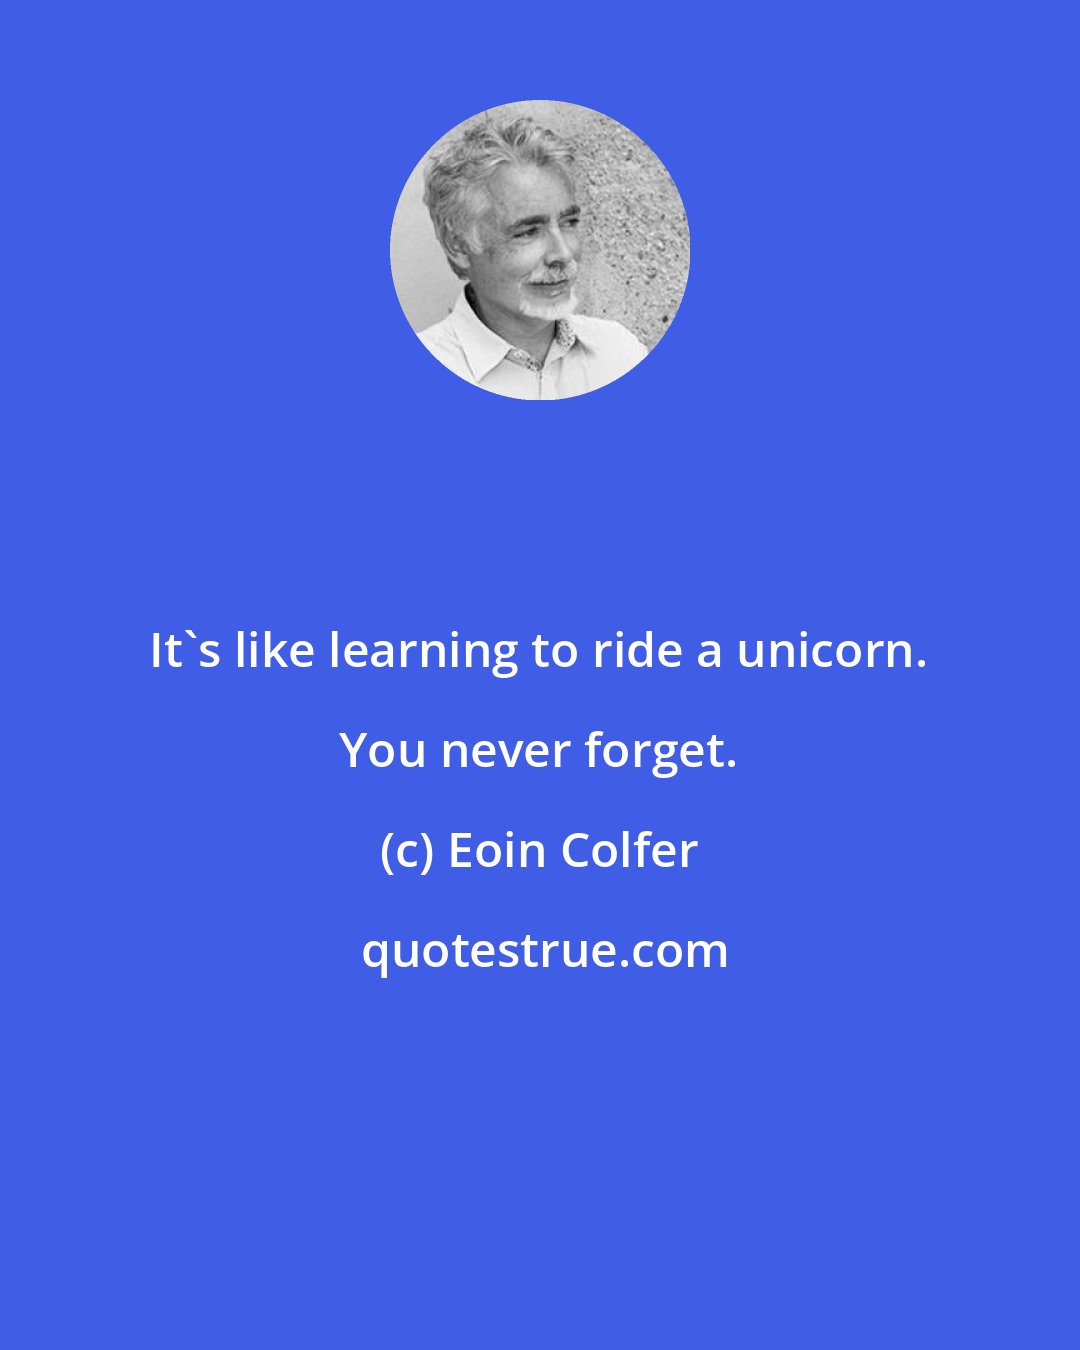 Eoin Colfer: It's like learning to ride a unicorn. You never forget.